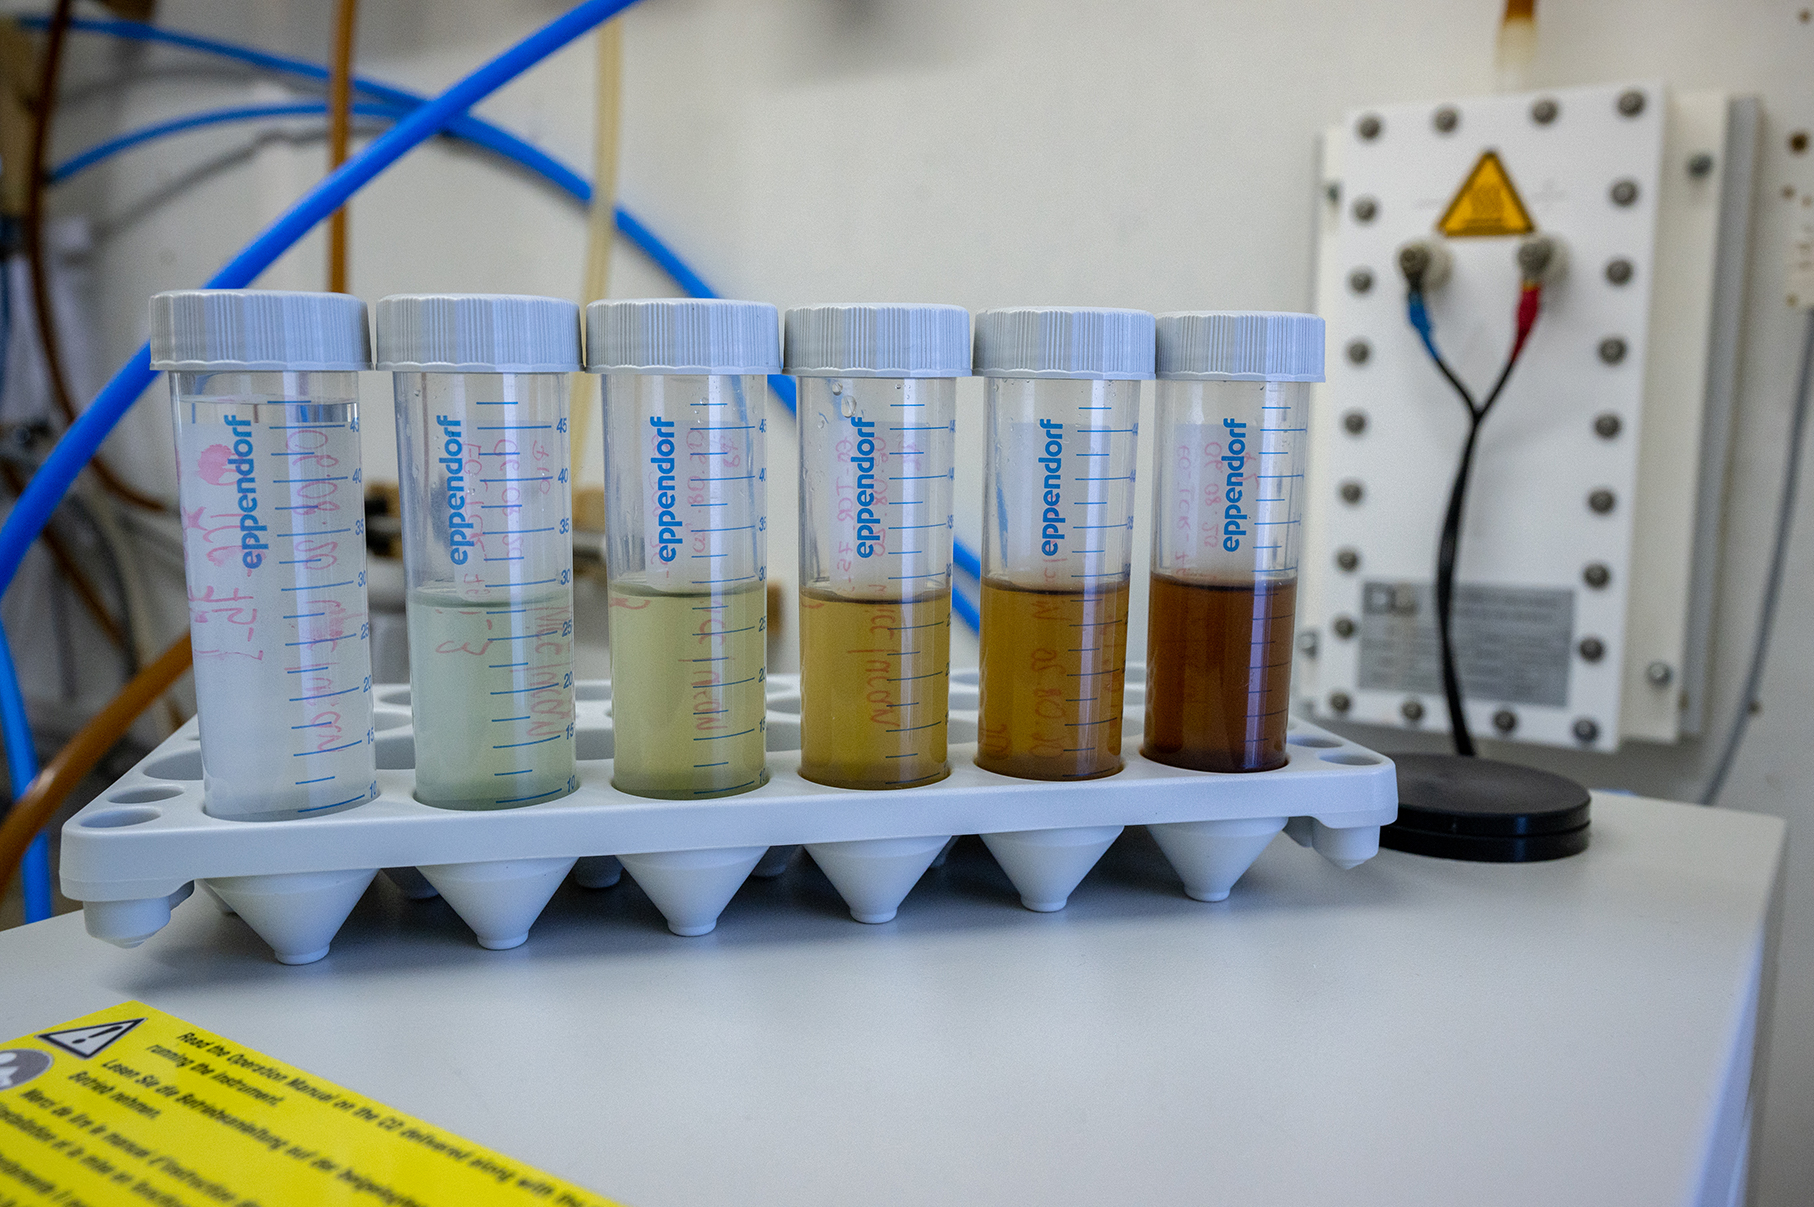 Significant reduction of turbidity of process waste water by electrooxidation (right: raw sample)